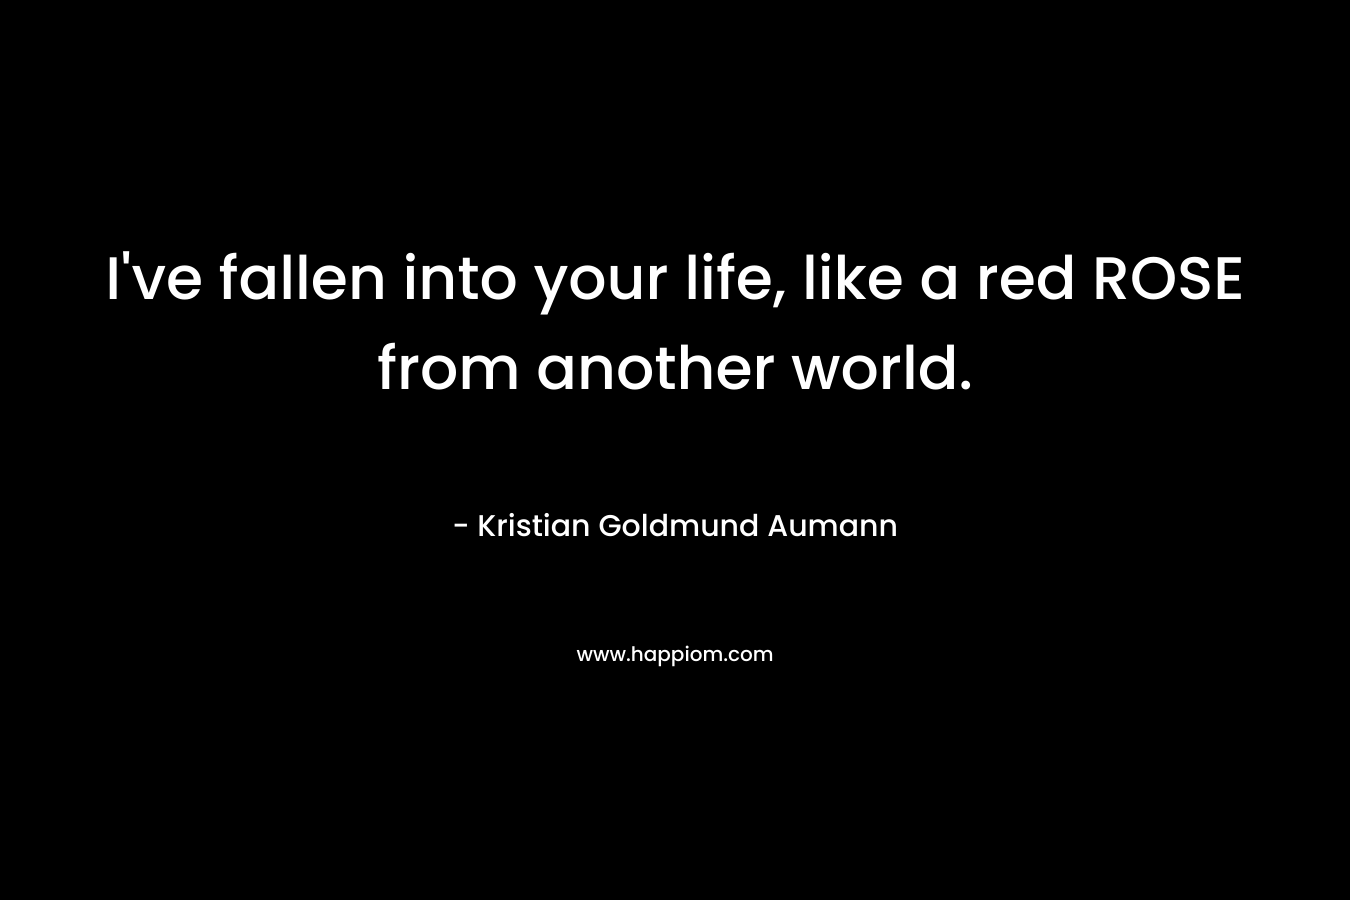 I’ve fallen into your life, like a red ROSE from another world. – Kristian Goldmund Aumann